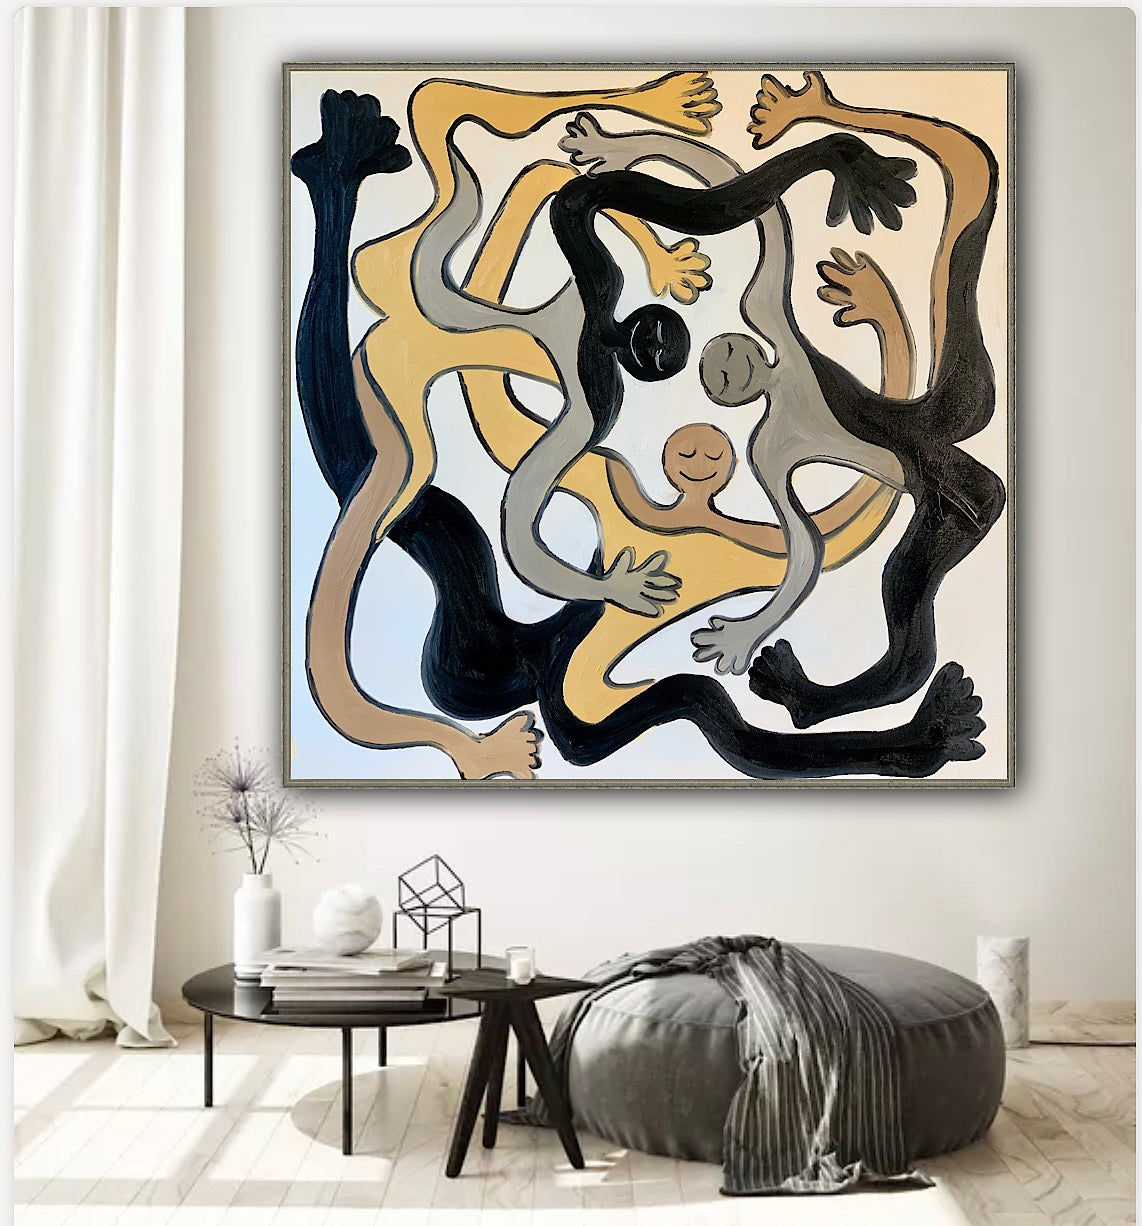 An acrobat dance picasso  abstract original oil painting on canvas 80 x  80cm